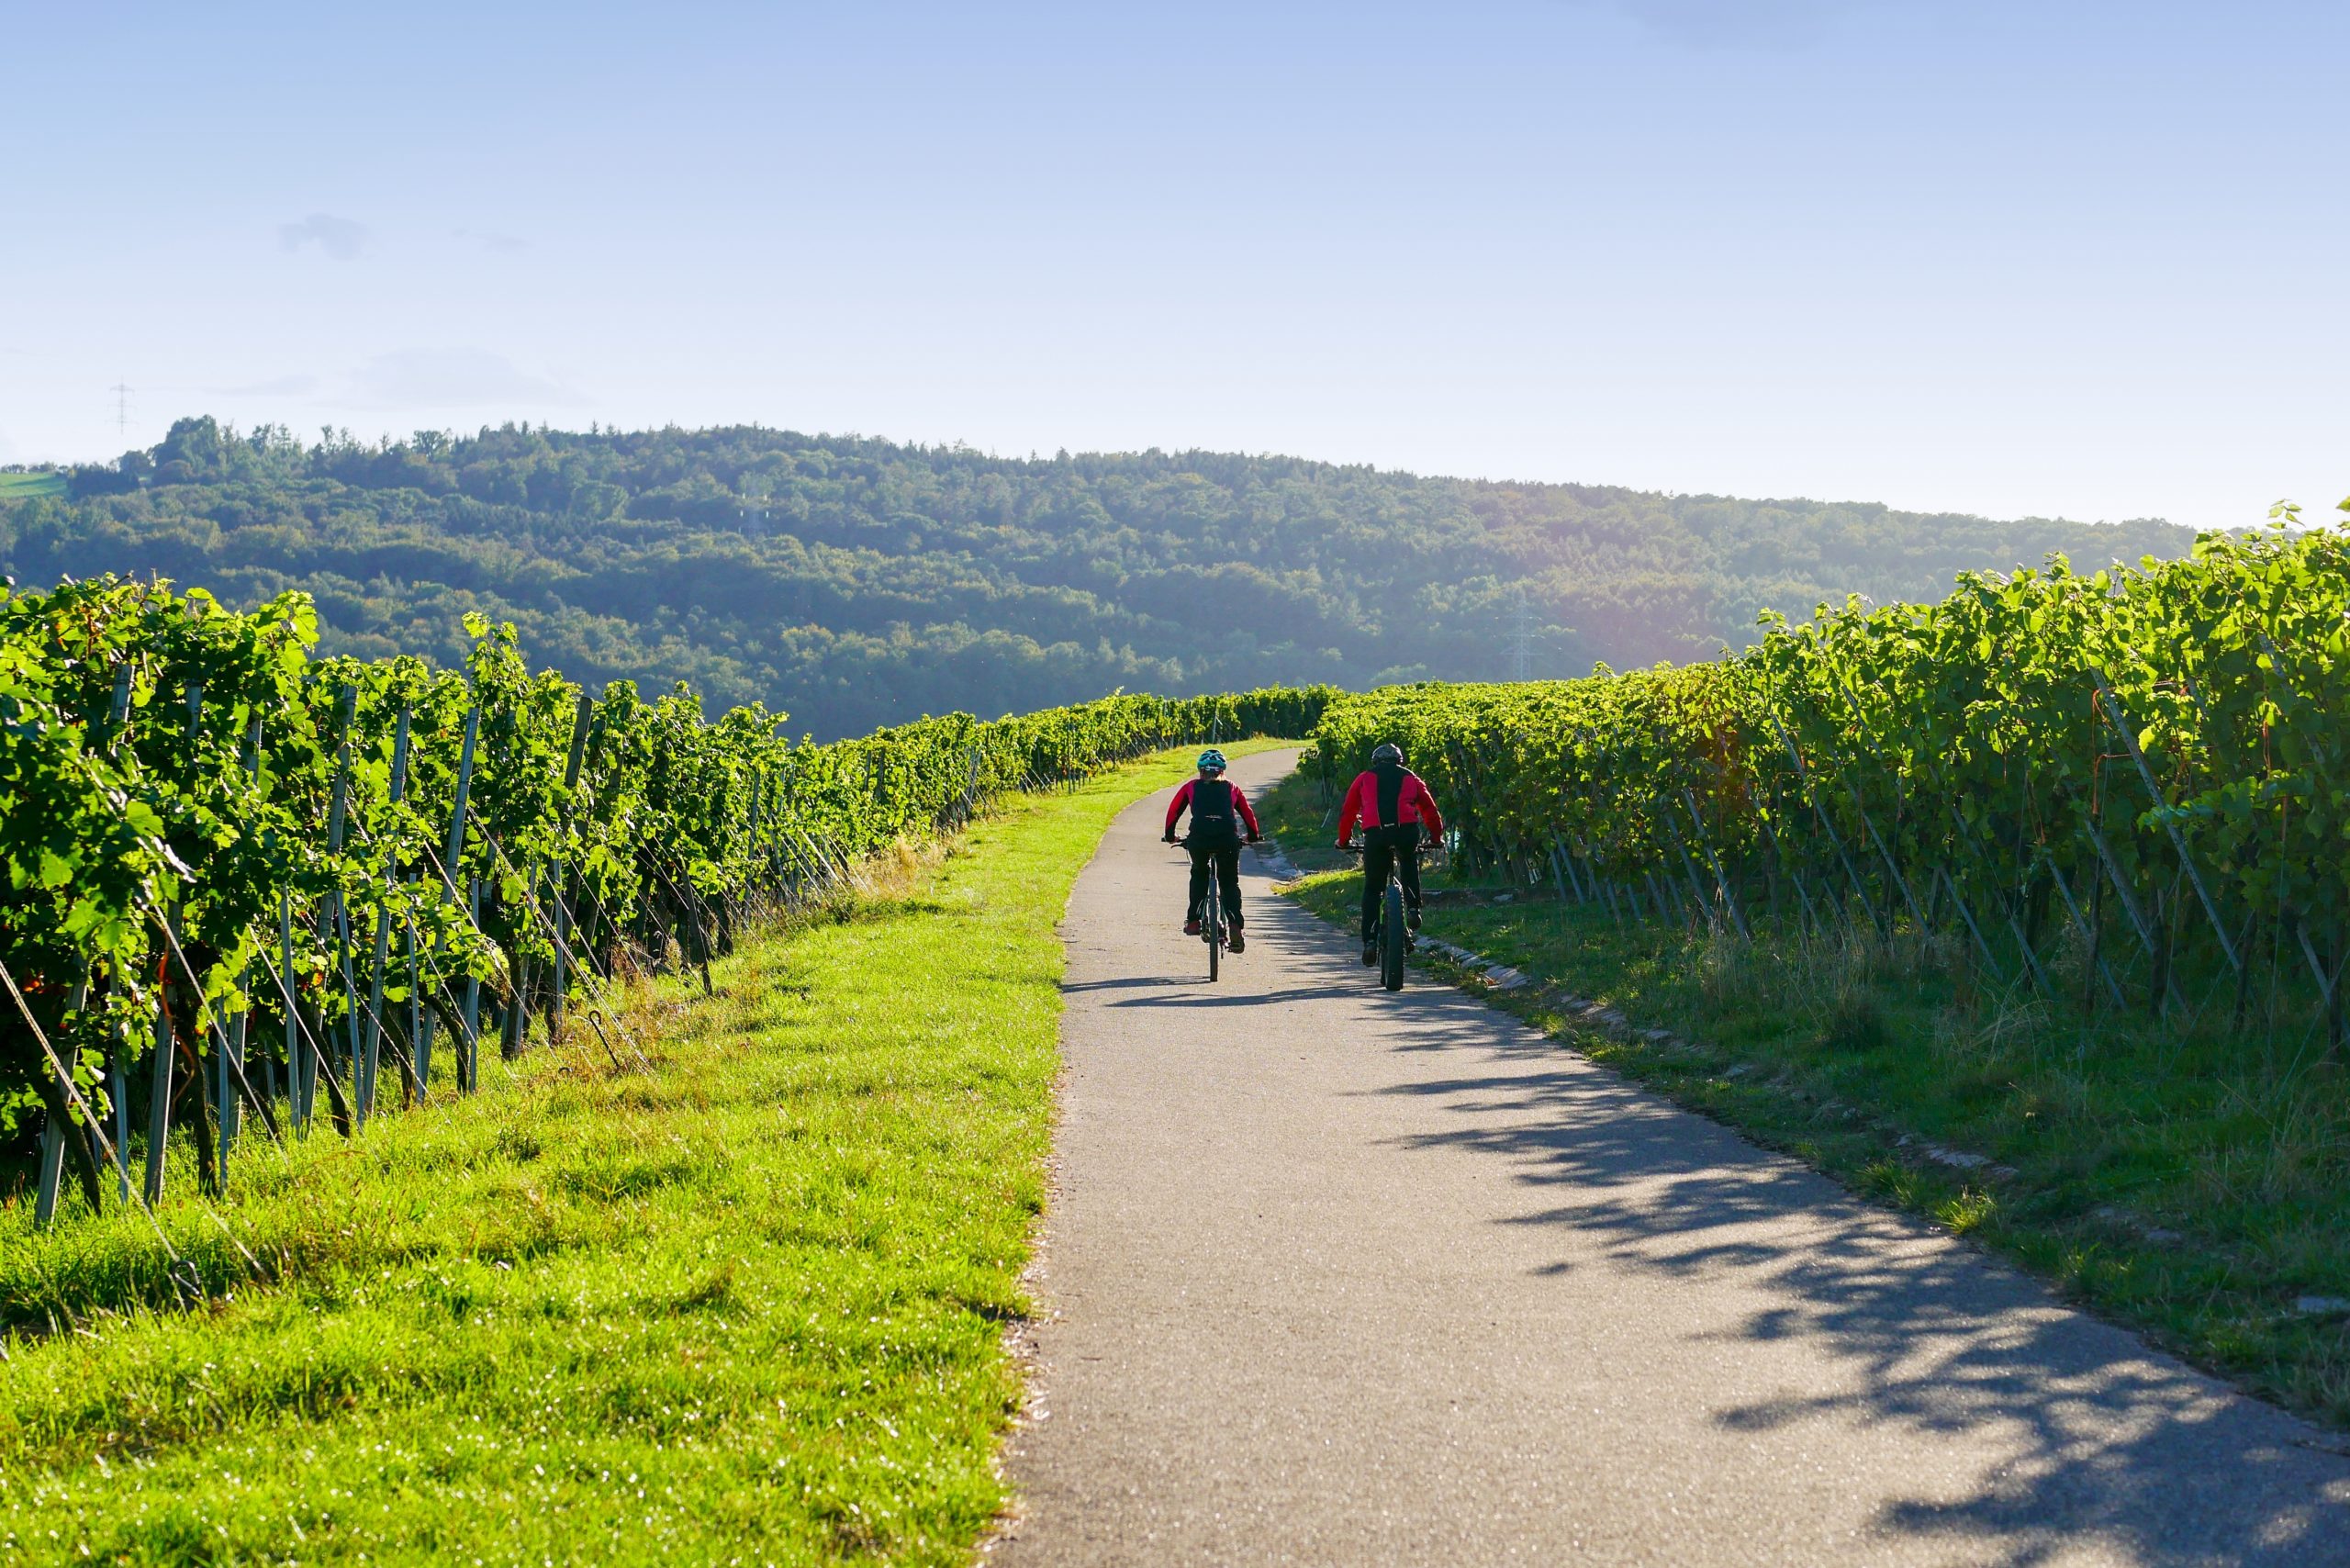 Two bicyclists riding through a vineyard